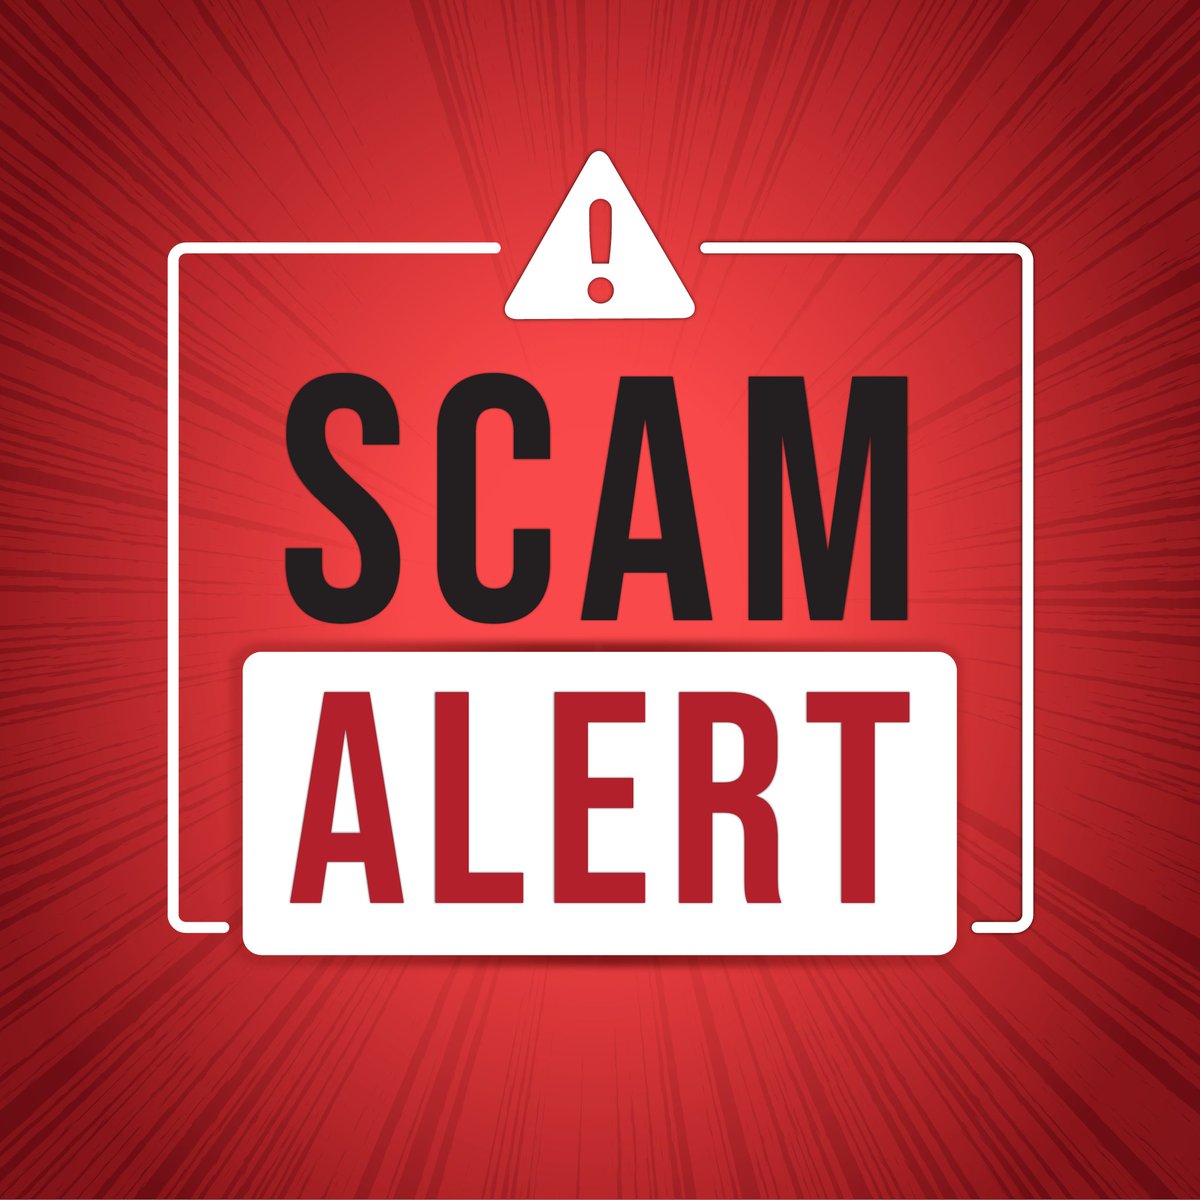 A phishing scam is targeting @PA_Turnpike E-ZPass account holders requesting information to settle outstanding toll amounts. The texts falsely claim to be from “Pa Turnpike Toll Services.” You can report such texts here: bit.ly/485lenl